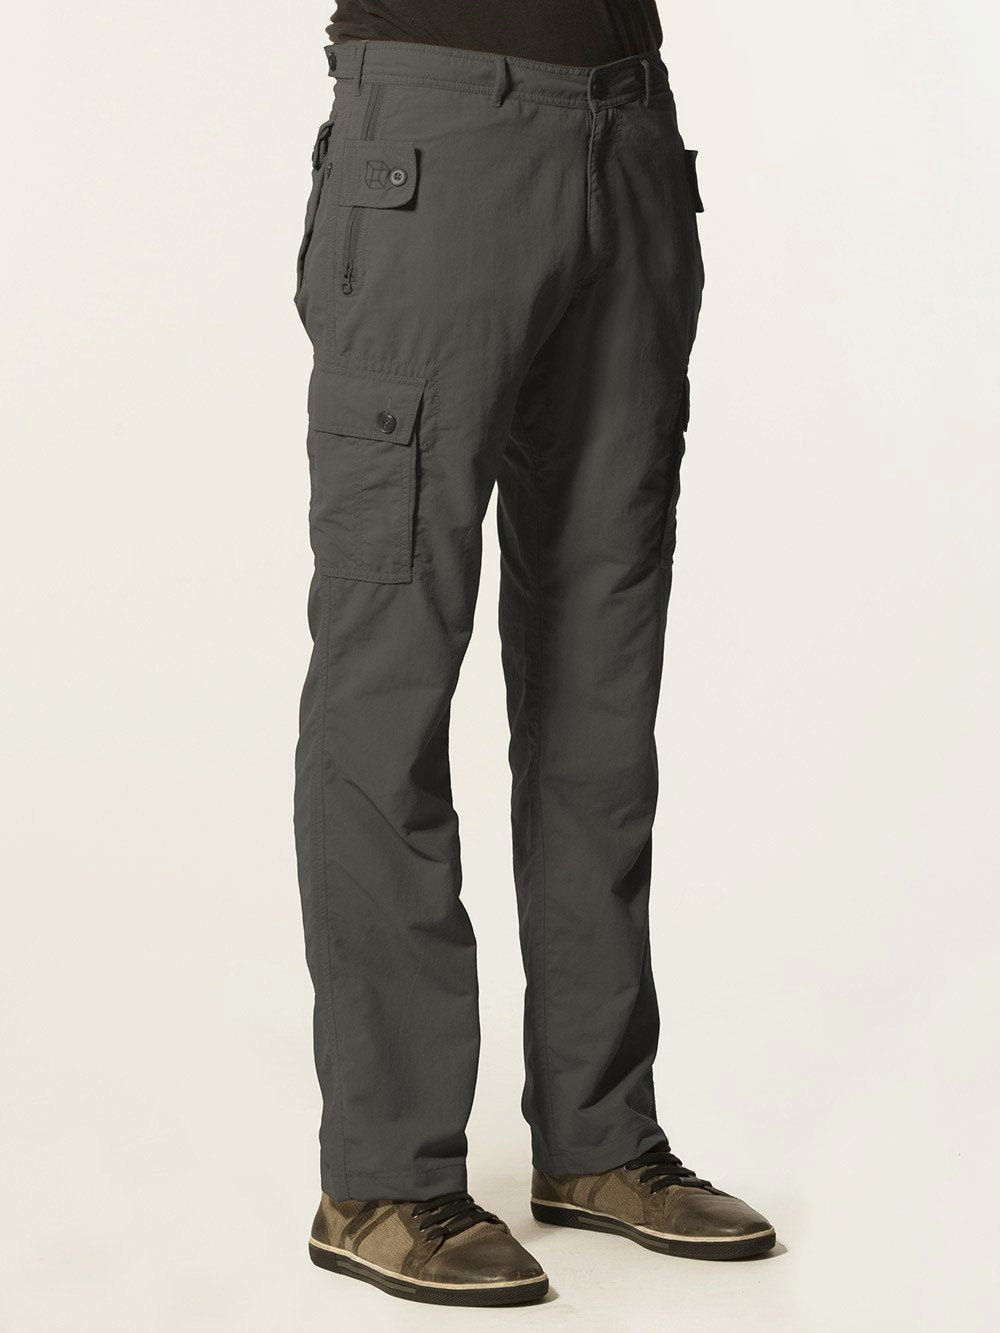 Six Pocket Cargo Pants: Best Six Pocket Cargo Pants in India for Your  Outdoors and Indoors Style - The Economic Times